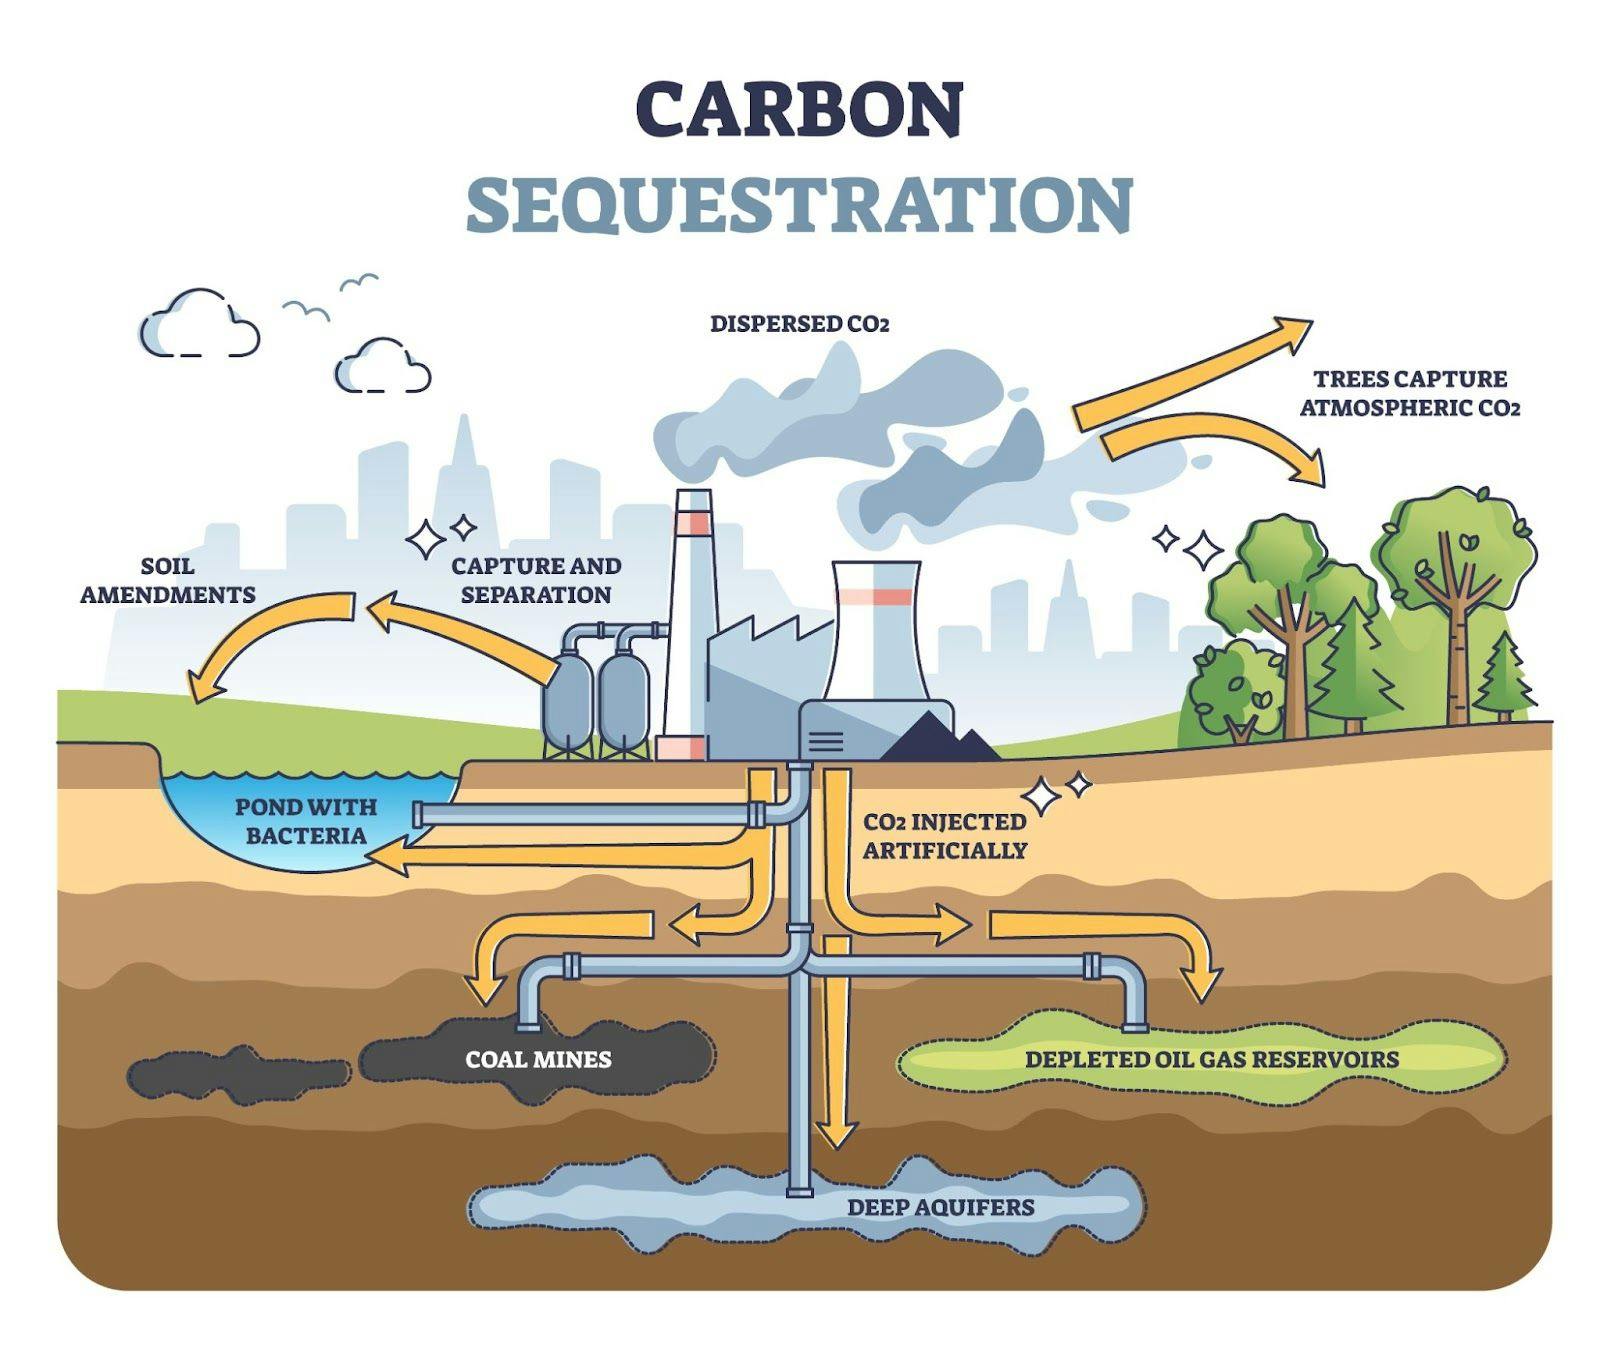 An image showing carbon sequestration